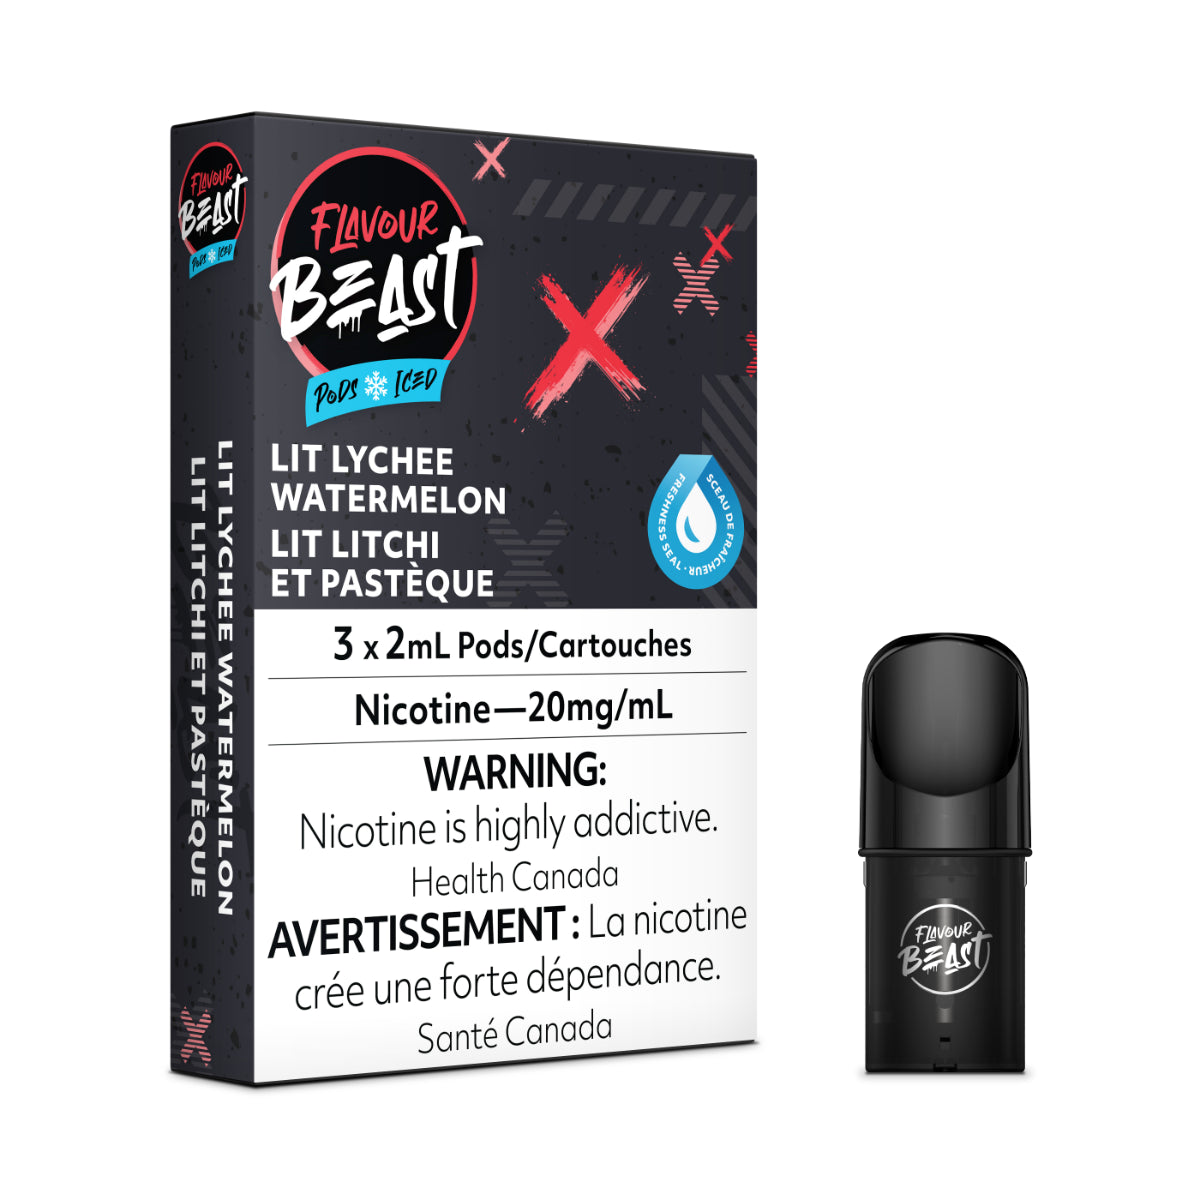 Lit Lychee Watermelon - Flavour Beast Pod Pack - 20mg - EXCISED